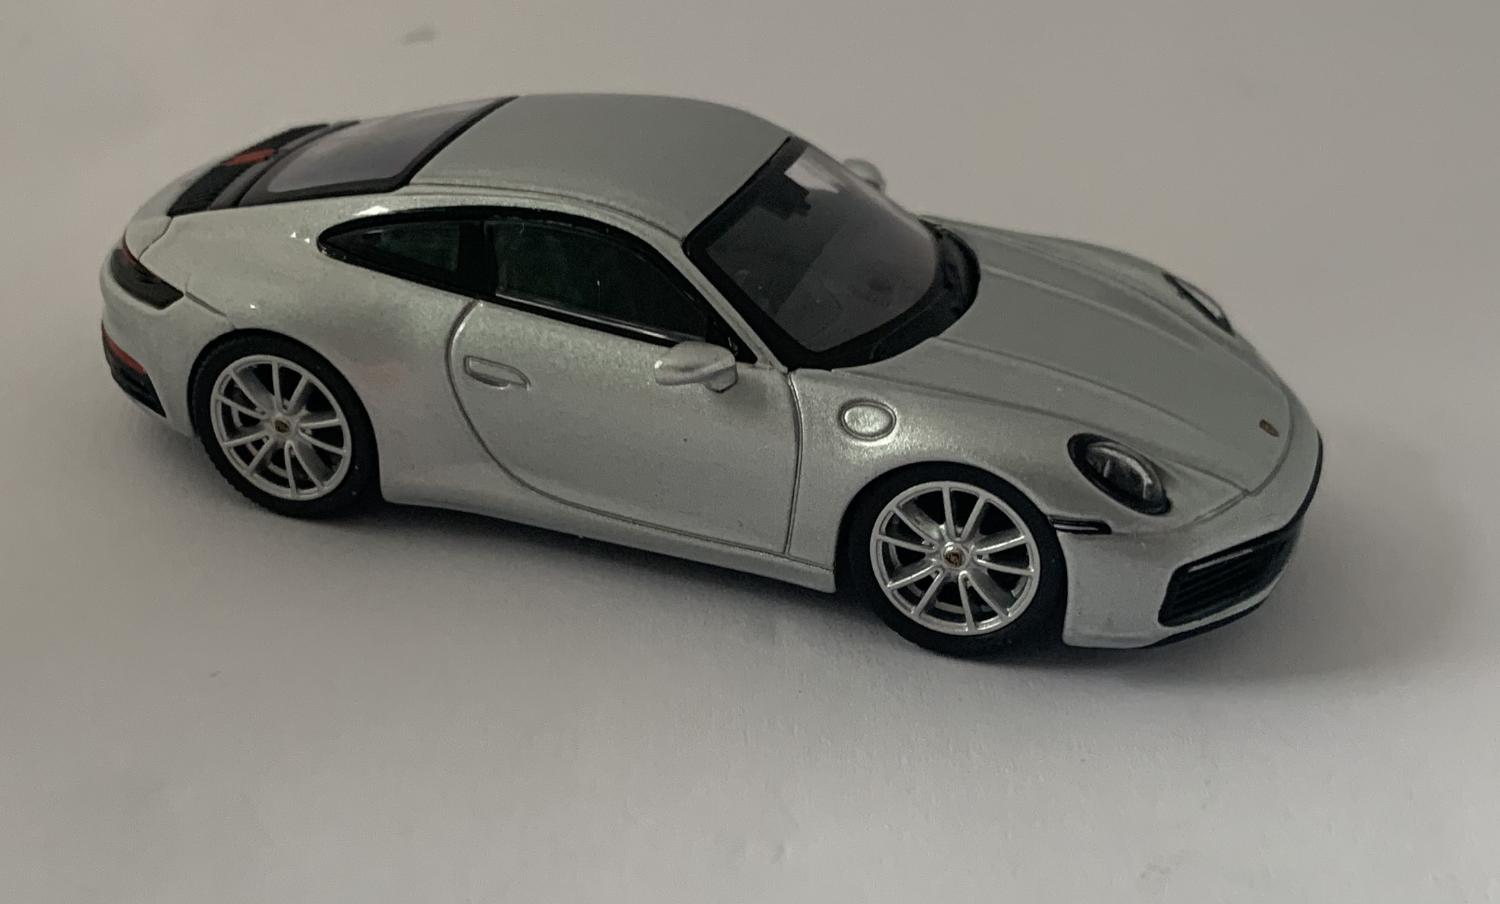 An excellent scale model of a Porsche 911 Carrera 4S decorated in silver metallic with silver wheels. Other trims are finished in black and silver. Features include working wheels. The interior is finished in black with RHD steering wheel